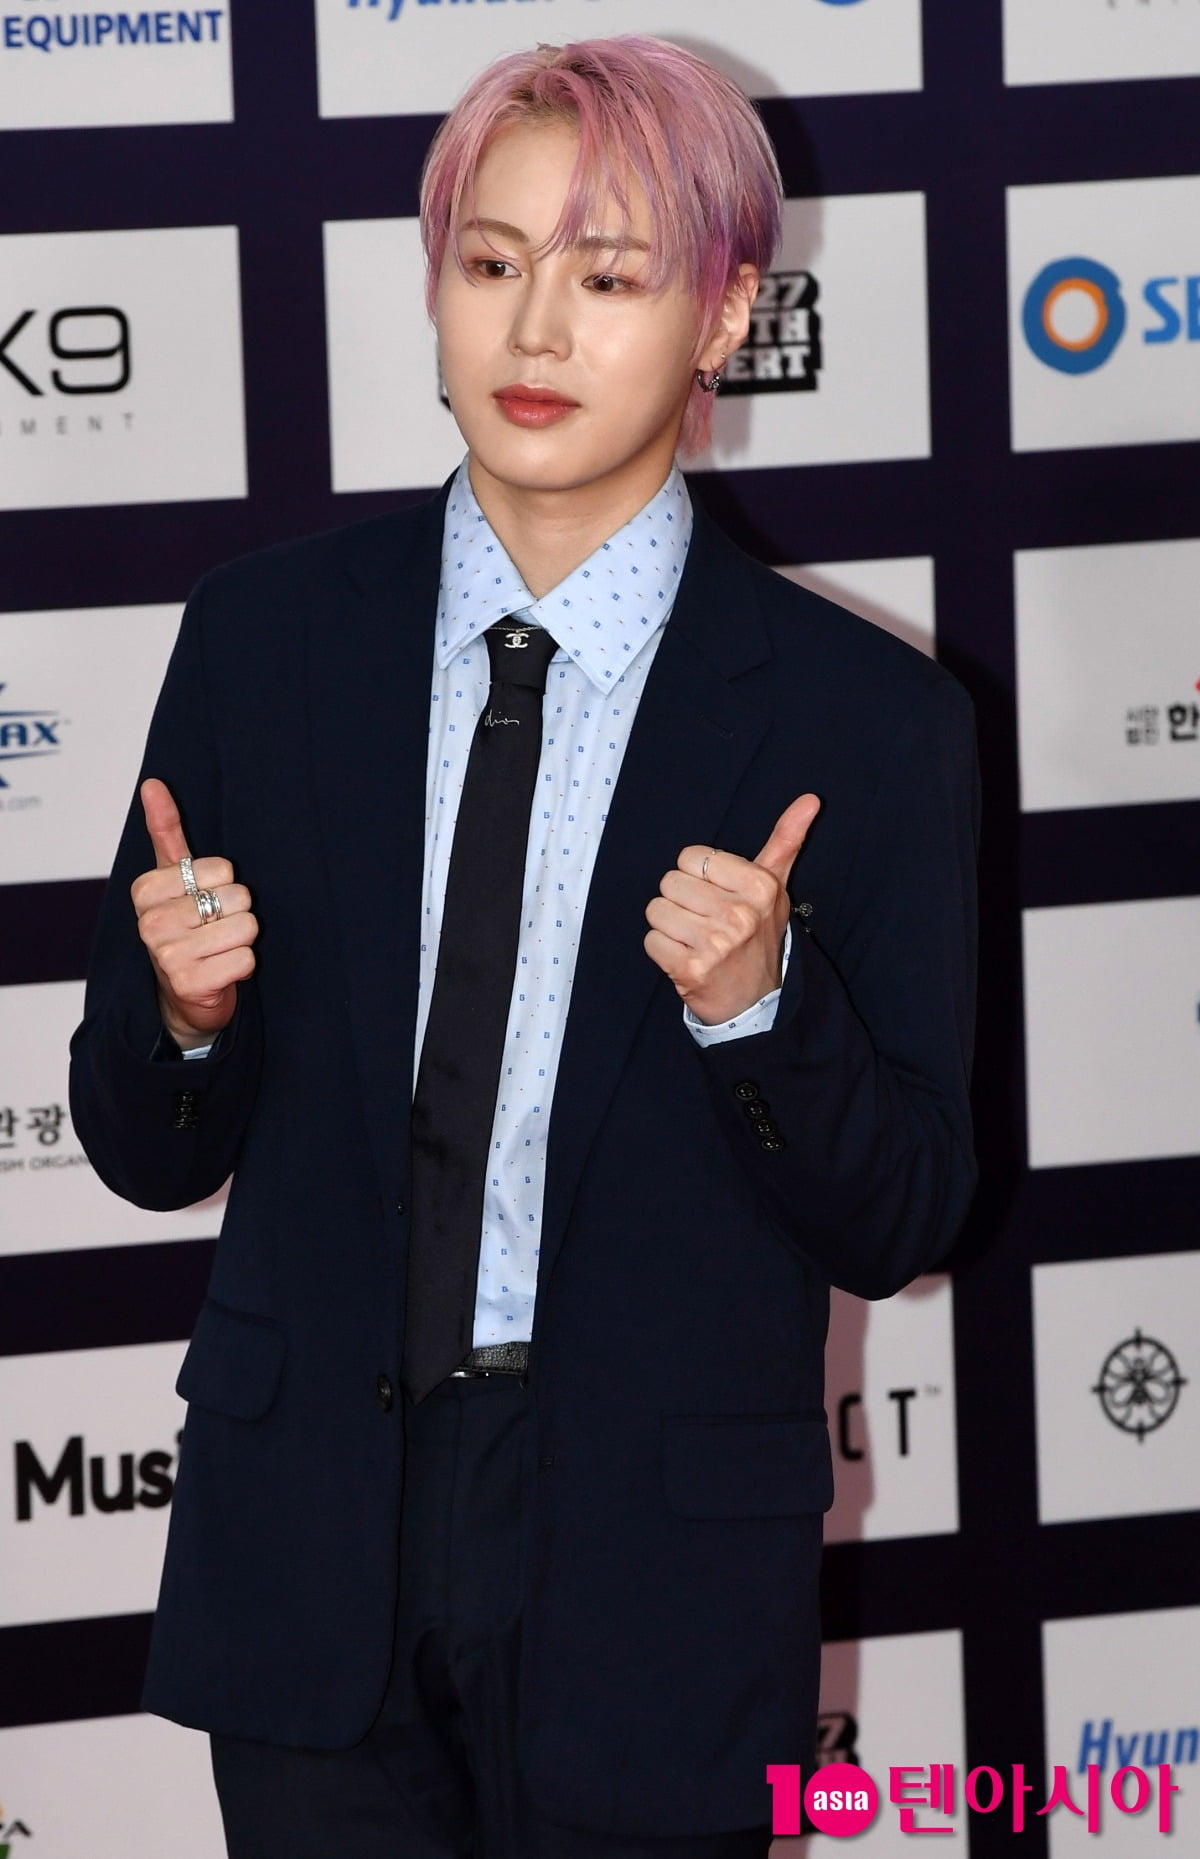 Ha Sung-woon was selected as the Singer of March